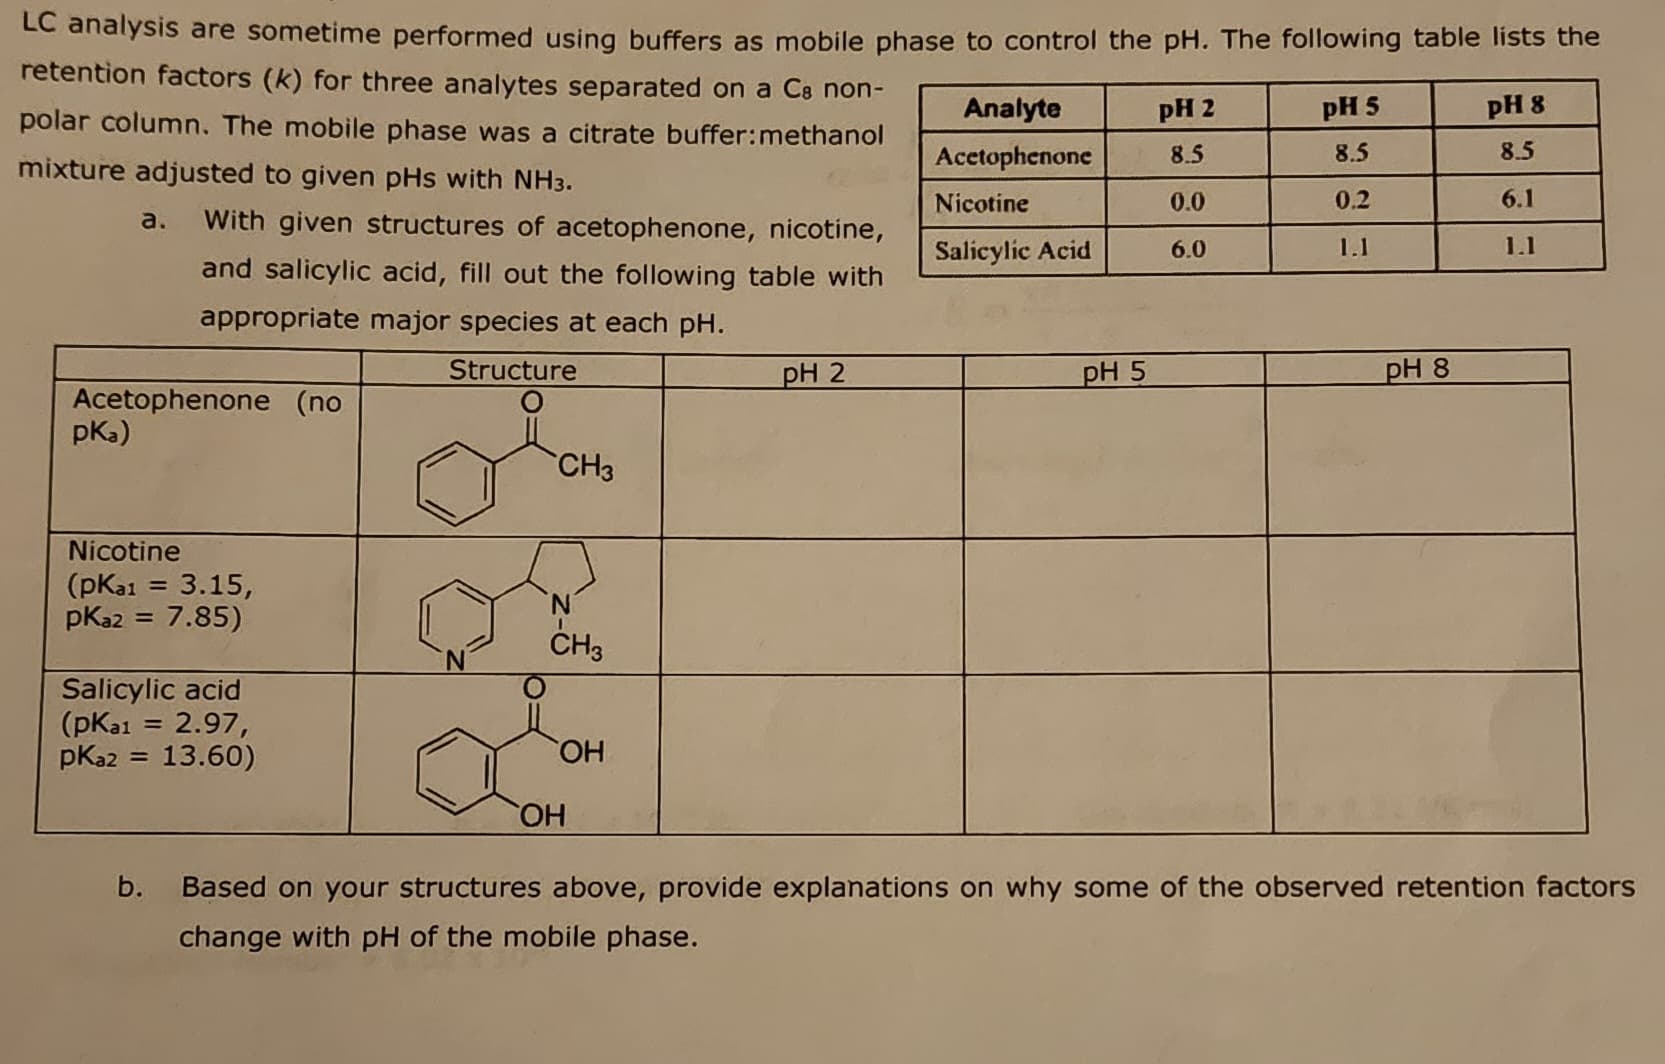 LC analysis are sometime performed using buffers as mobile phase to control the pH. The following table lists the
retention factors (k) for three analytes separated on a C8 non-
polar column. The mobile phase was a citrate buffer: methanol
mixture adjusted to given pHs with NH3.
a. With given structures of acetophenone, nicotine,
and salicylic acid, fill out the following table with
appropriate major species at each pH.
Structure
Acetophenone (no
pka)
Nicotine
(pka1 = 3.15,
pka2 = 7.85)
Salicylic acid
(pka1 = 2.97,
pka2 = 13.60)
b.
CH3
CH3
OH
OH
pH 2
Analyte
Acetophenone
Nicotine
Salicylic Acid
pH 5
pH 2
8.5
0.0
6.0
pH 5
8.5
0.2
1.1
pH 8
pH 8
8.5
6.1
1.1
Based on your structures above, provide explanations on why some of the observed retention factors
change with pH of the mobile phase.